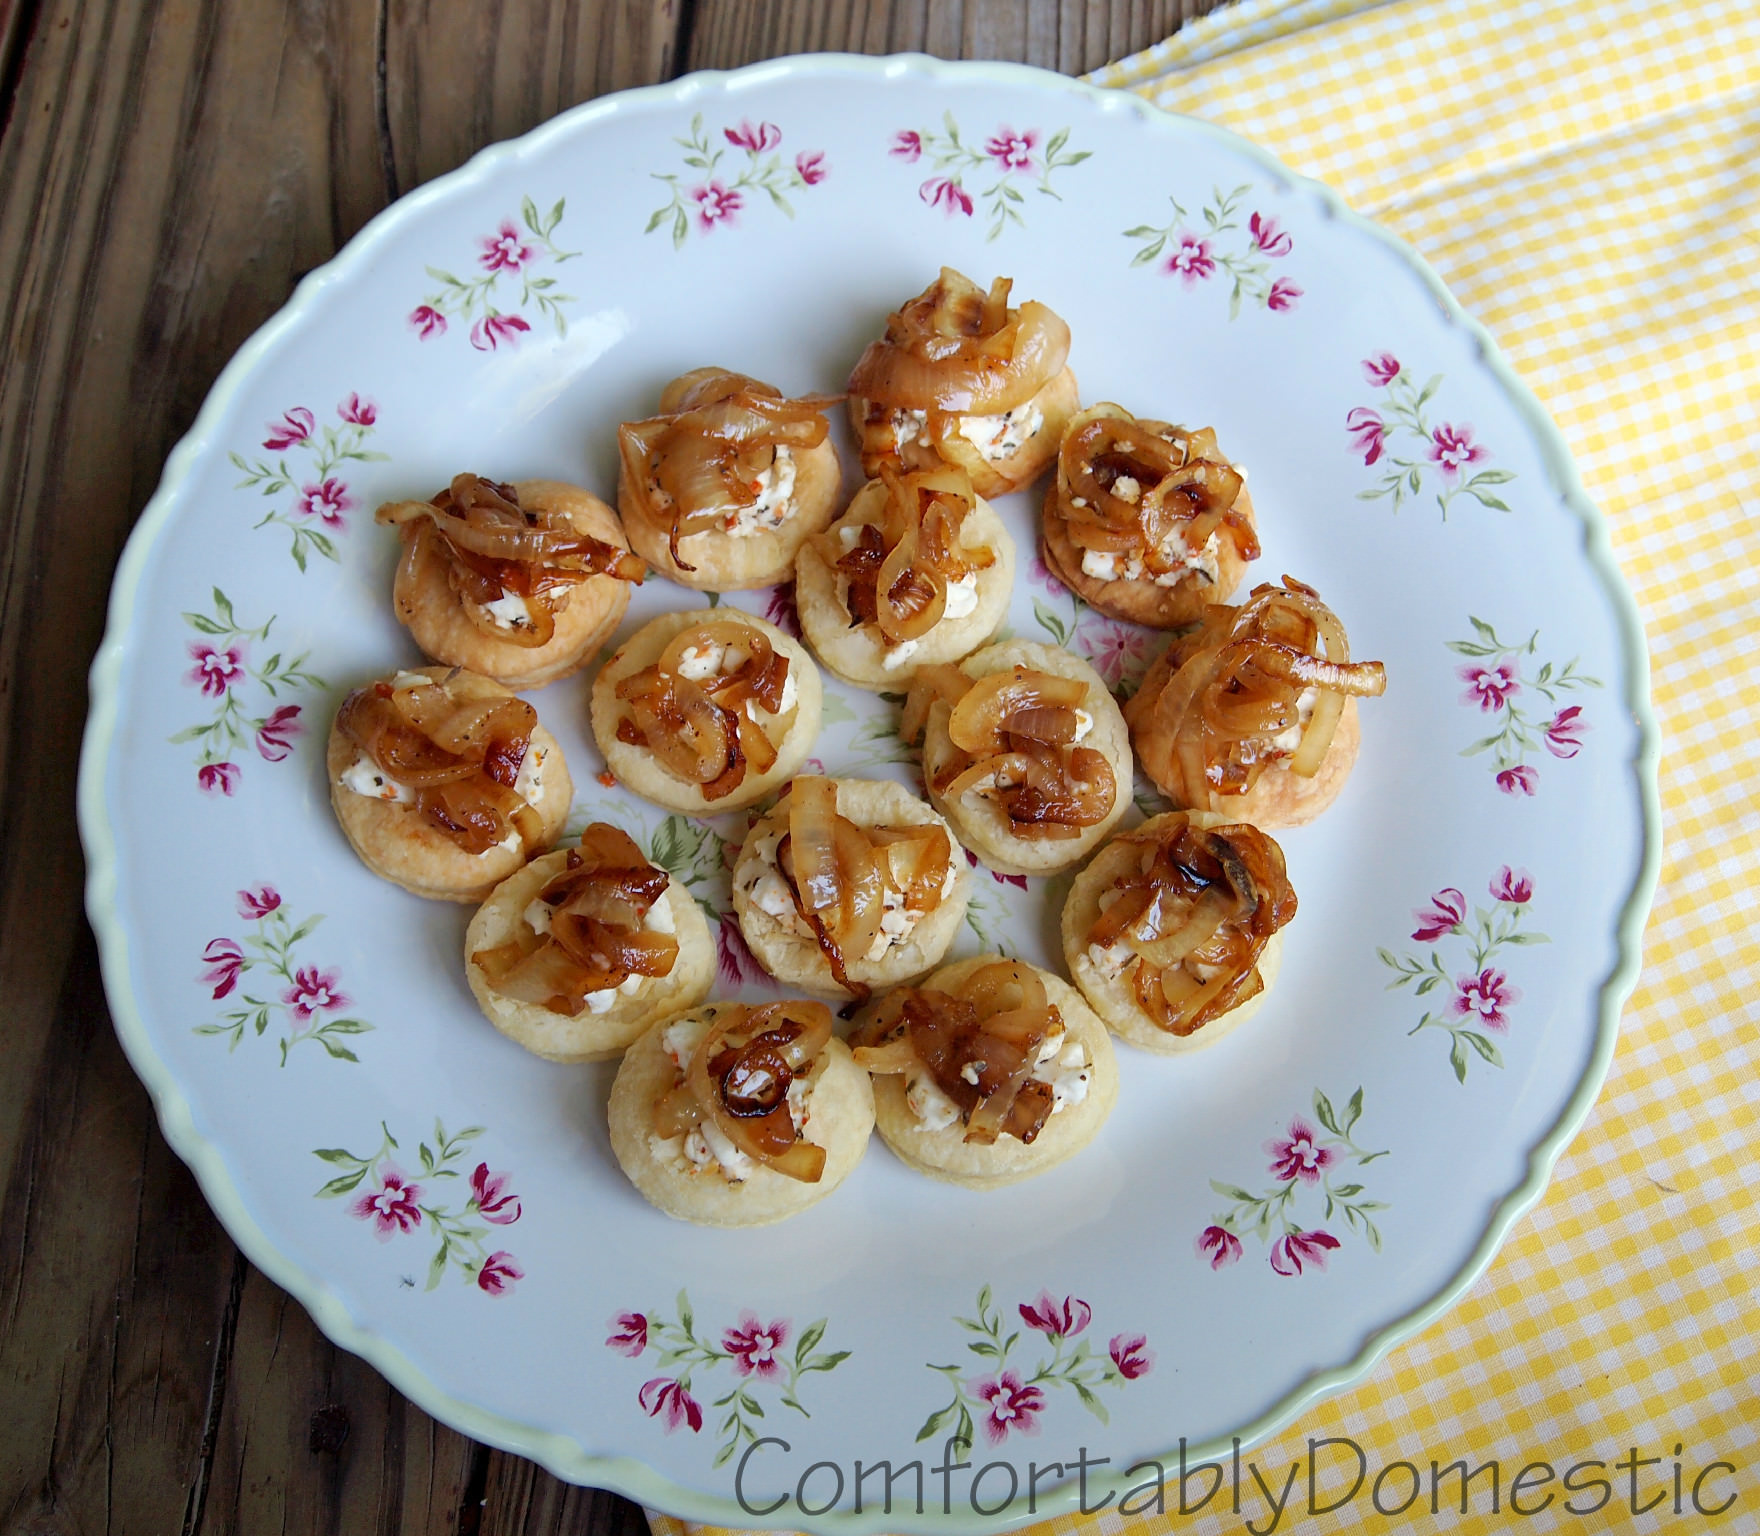 Caramelized Onion Goat Cheese Puffs are an easy-to-make, savory appetizer, ideal for holidays and special occasions, like an engagement party or bridal shower!